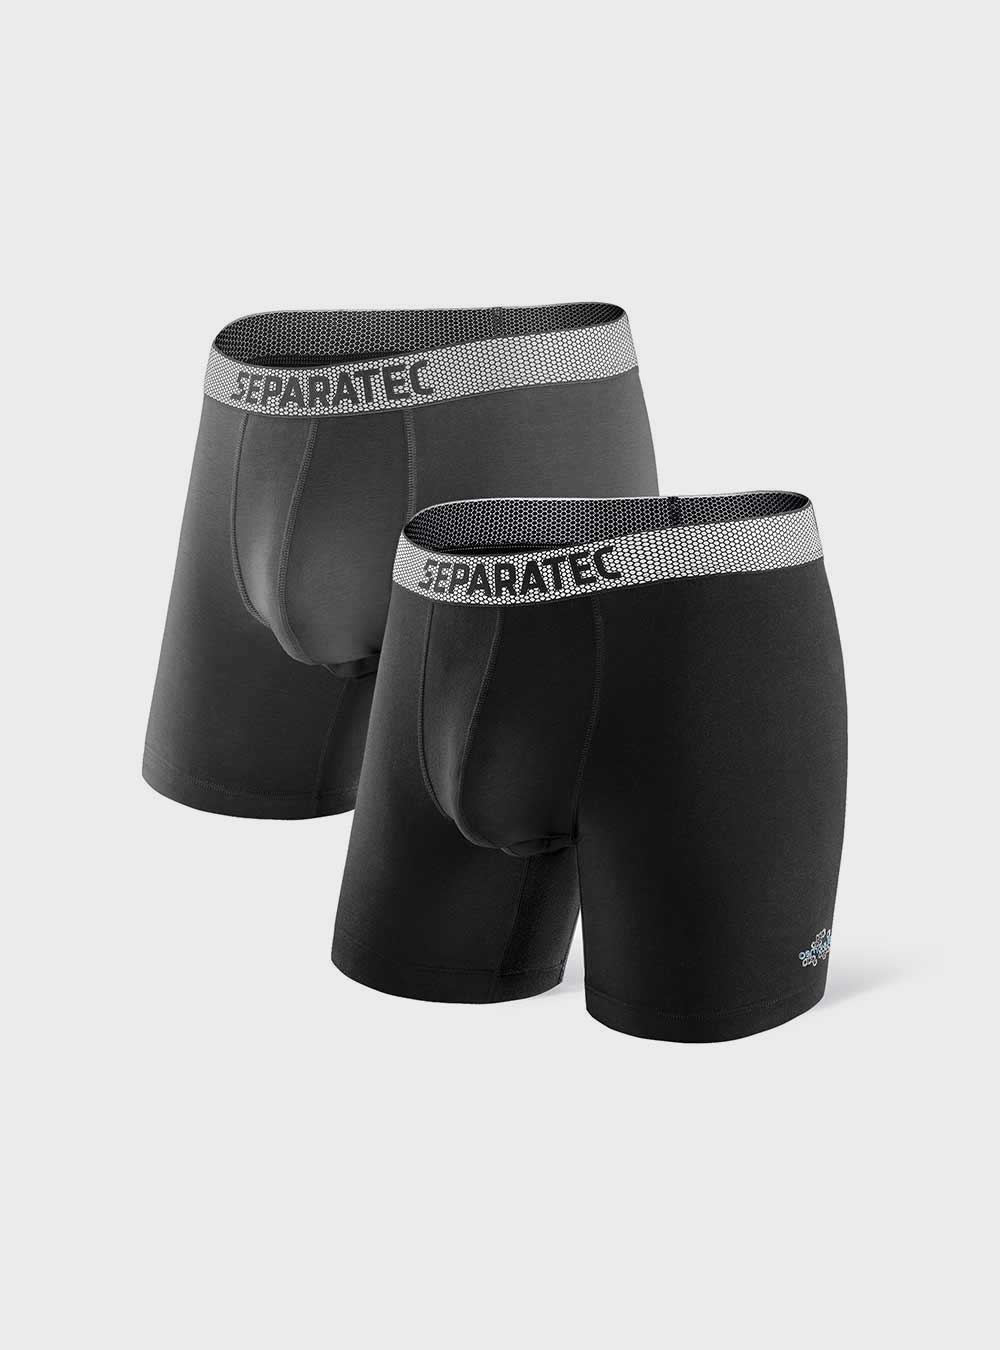 Plush Supersoft Micromodal OsmoHive™ Boxer Briefs